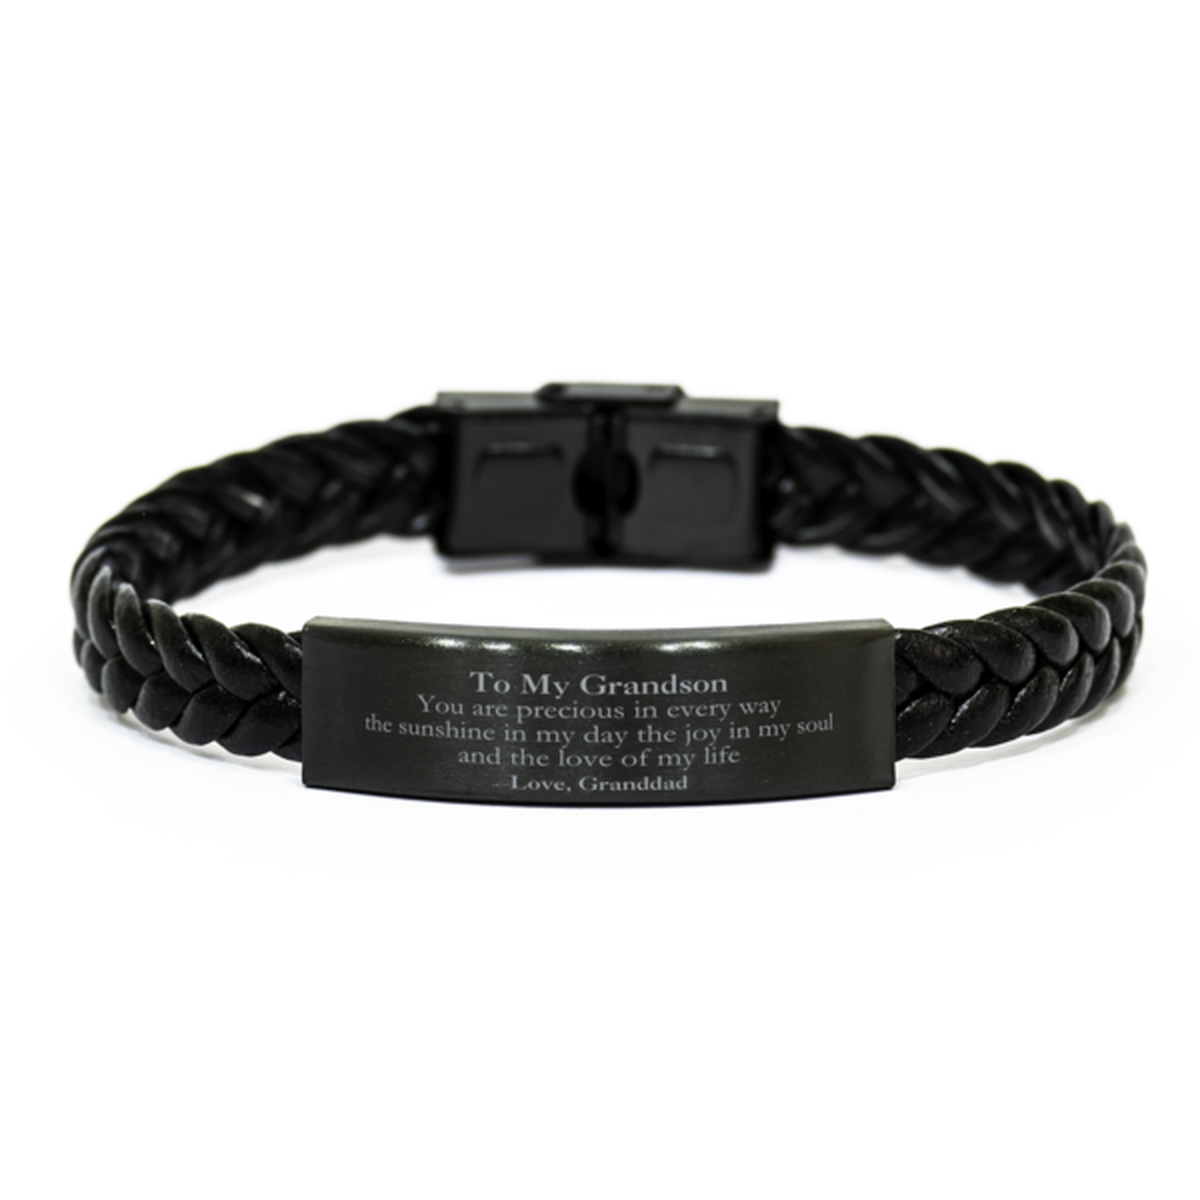 Graduation Gifts for Grandson Braided Leather Bracelet Present from Granddad, Christmas Grandson Birthday Gifts Grandson You are precious in every way the sunshine in my day. Love, Granddad